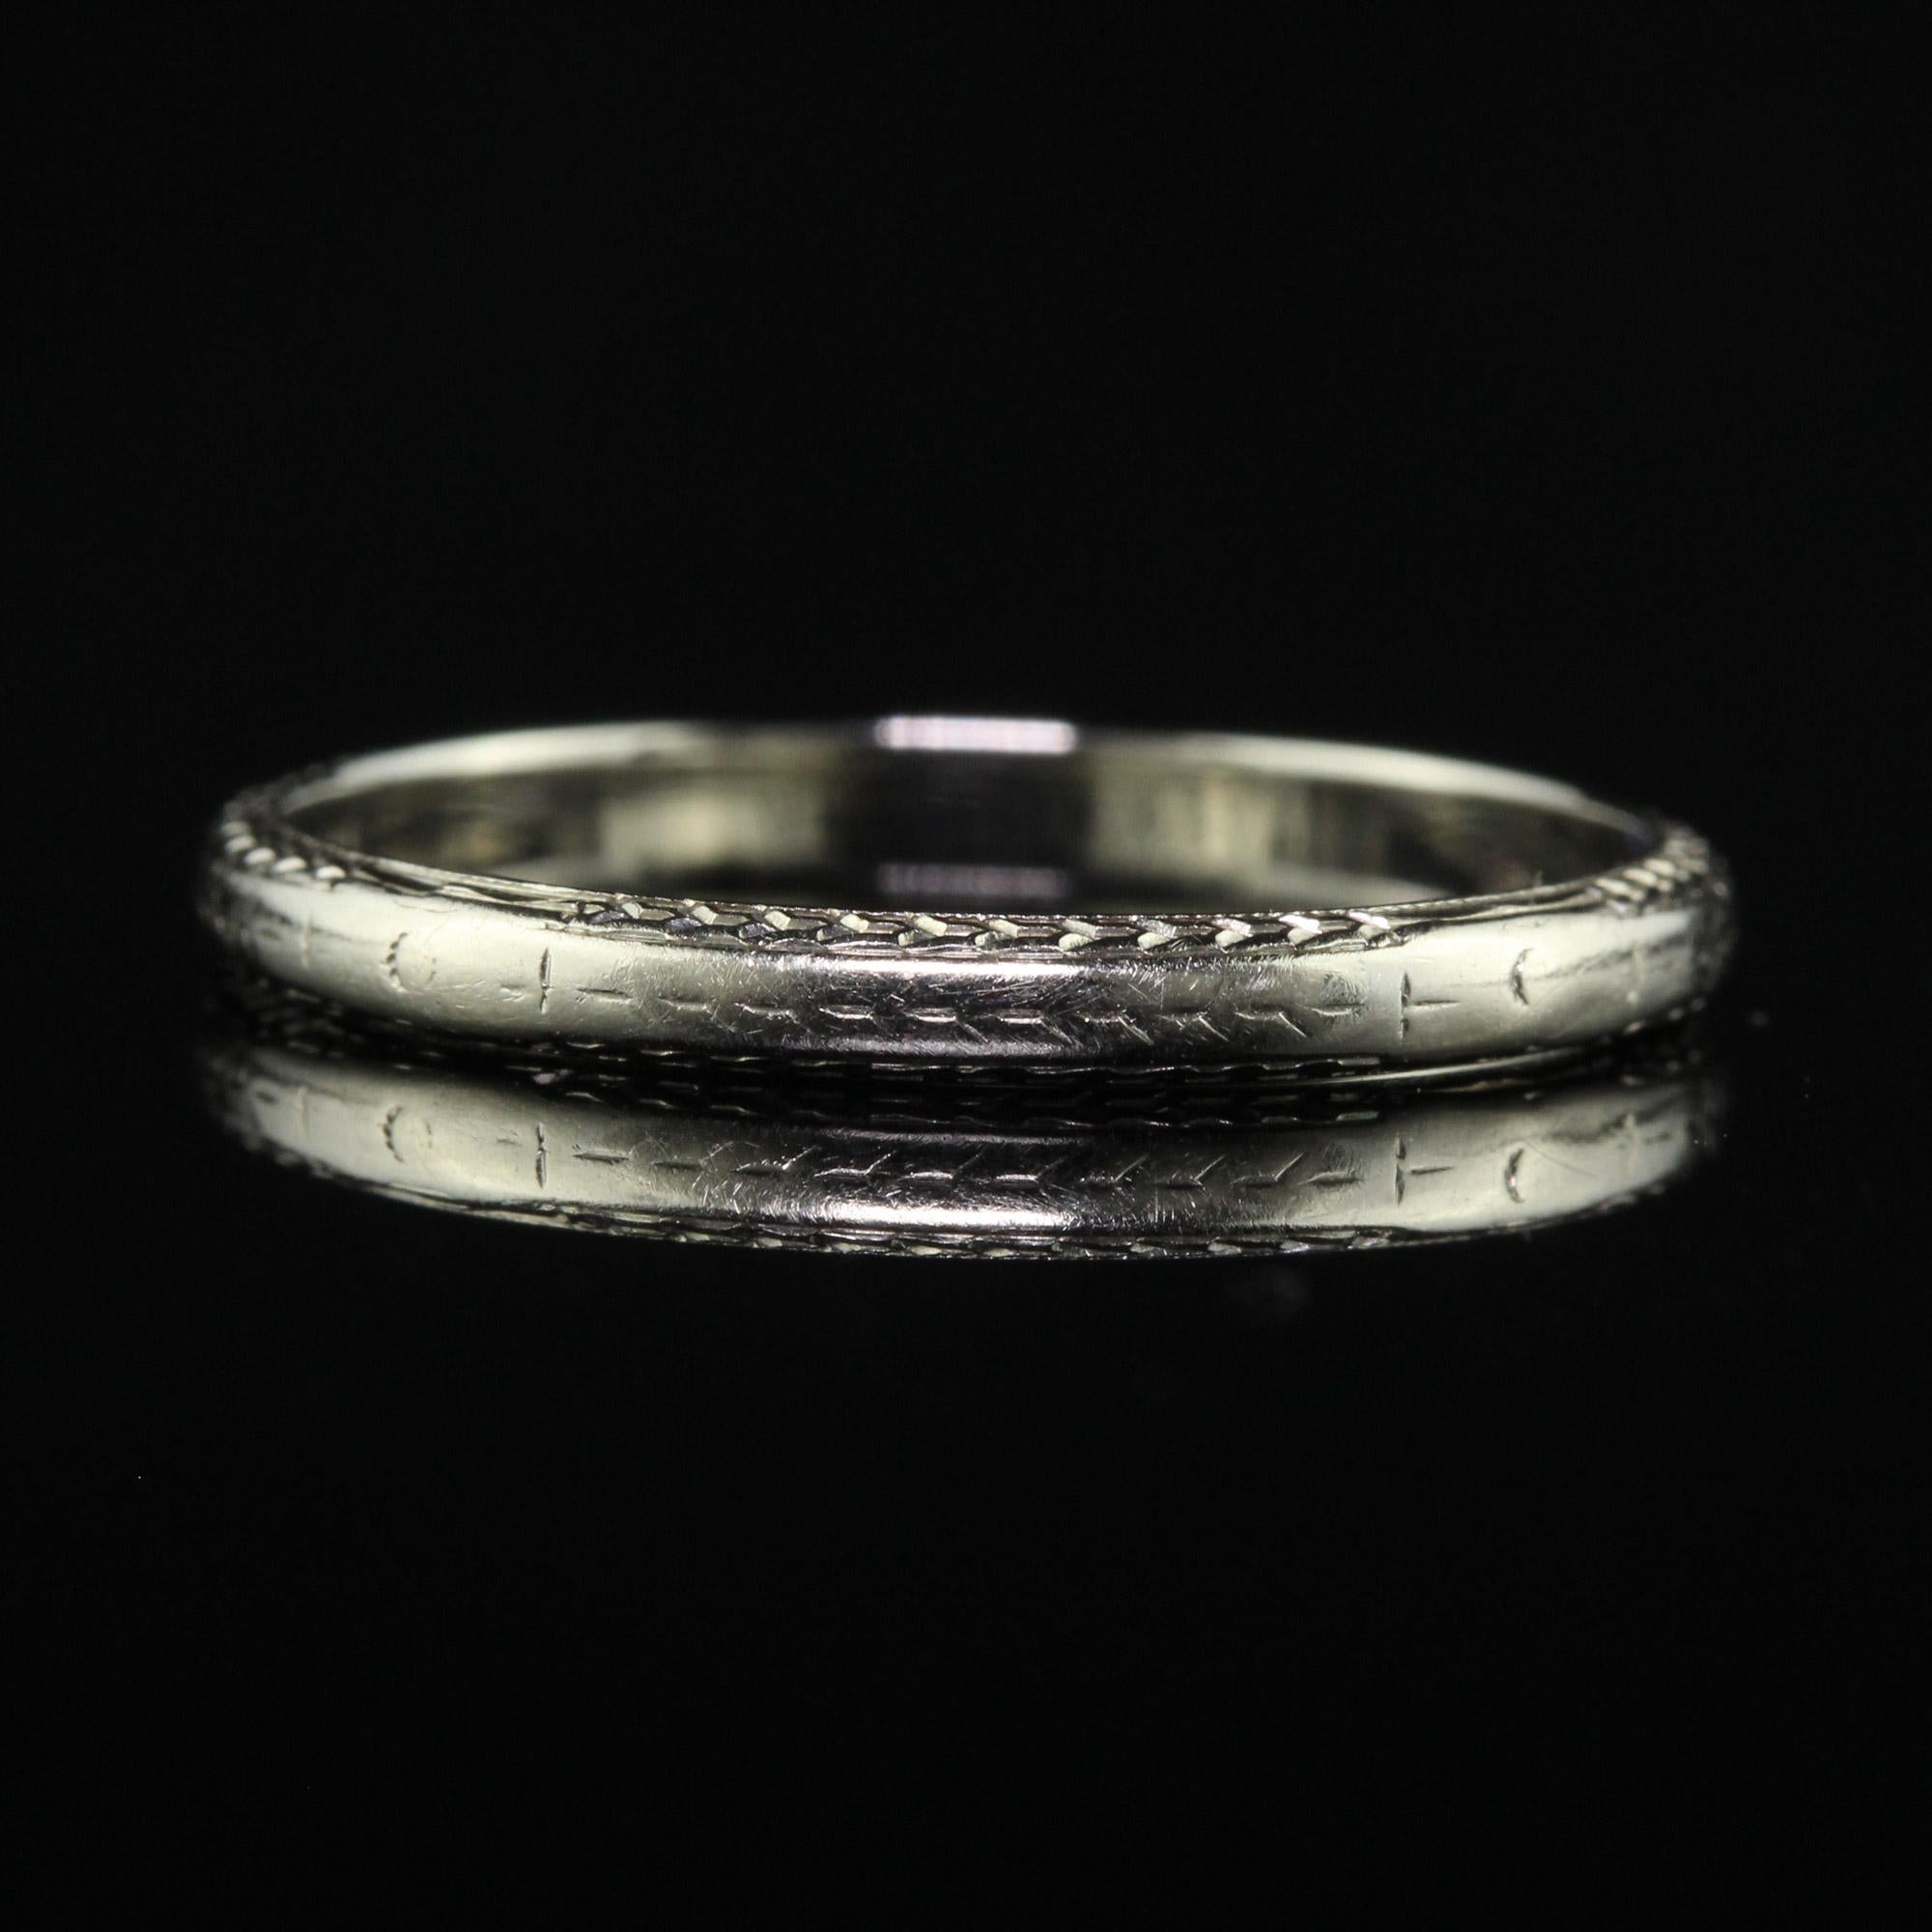 Antique Art Deco Wood and Sons 18K White Gold Engraved Wedding Band - Size 8 For Sale 1